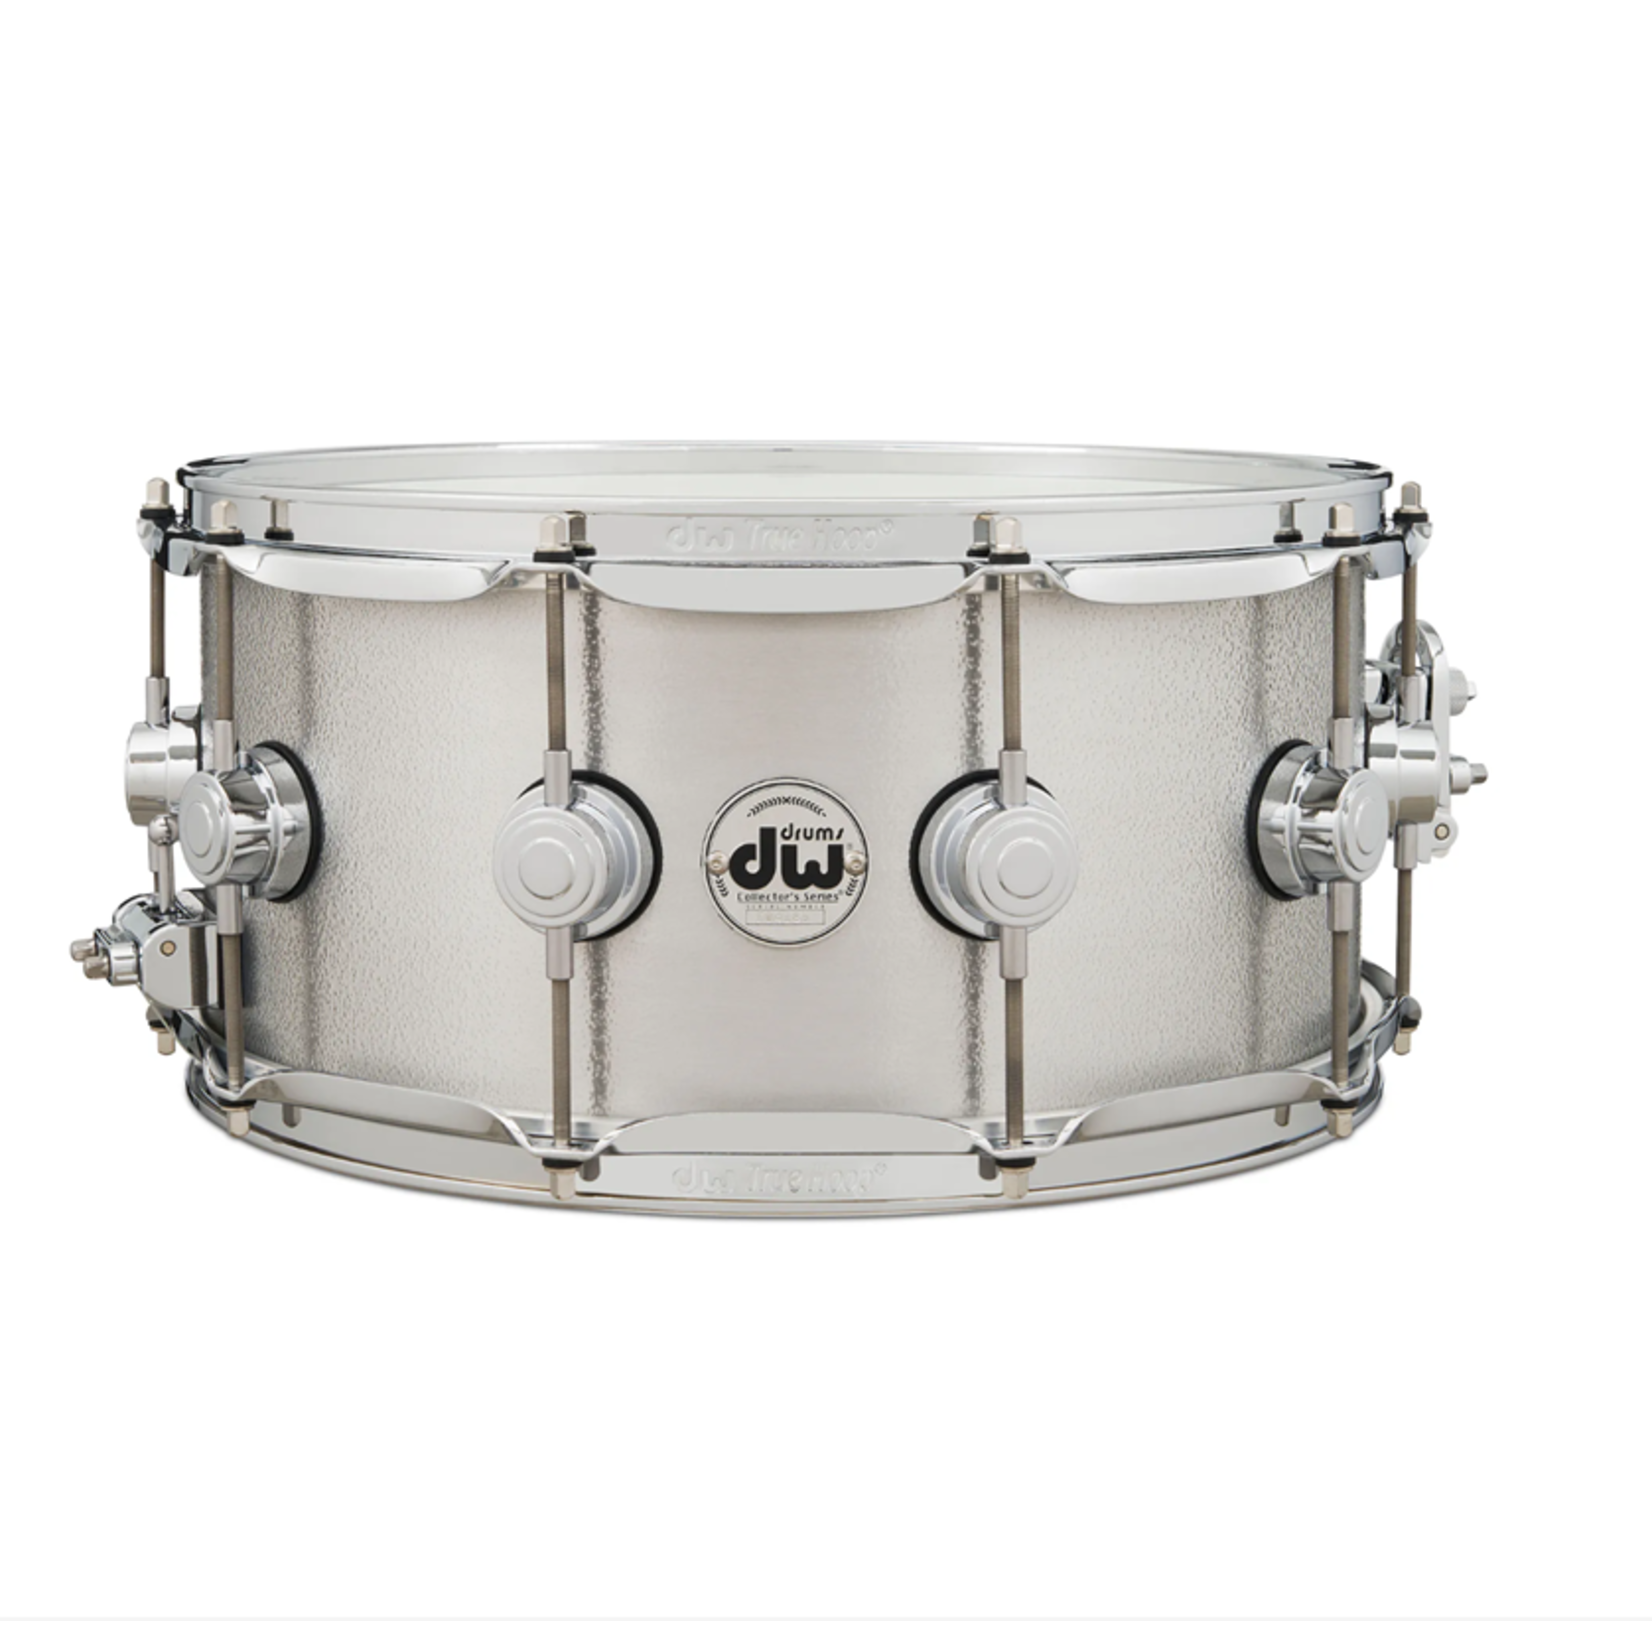 DW DW 6.5x14" 3mm Thick Aluminum Snare Drum with Chrome Hardware DRVA6514SVC